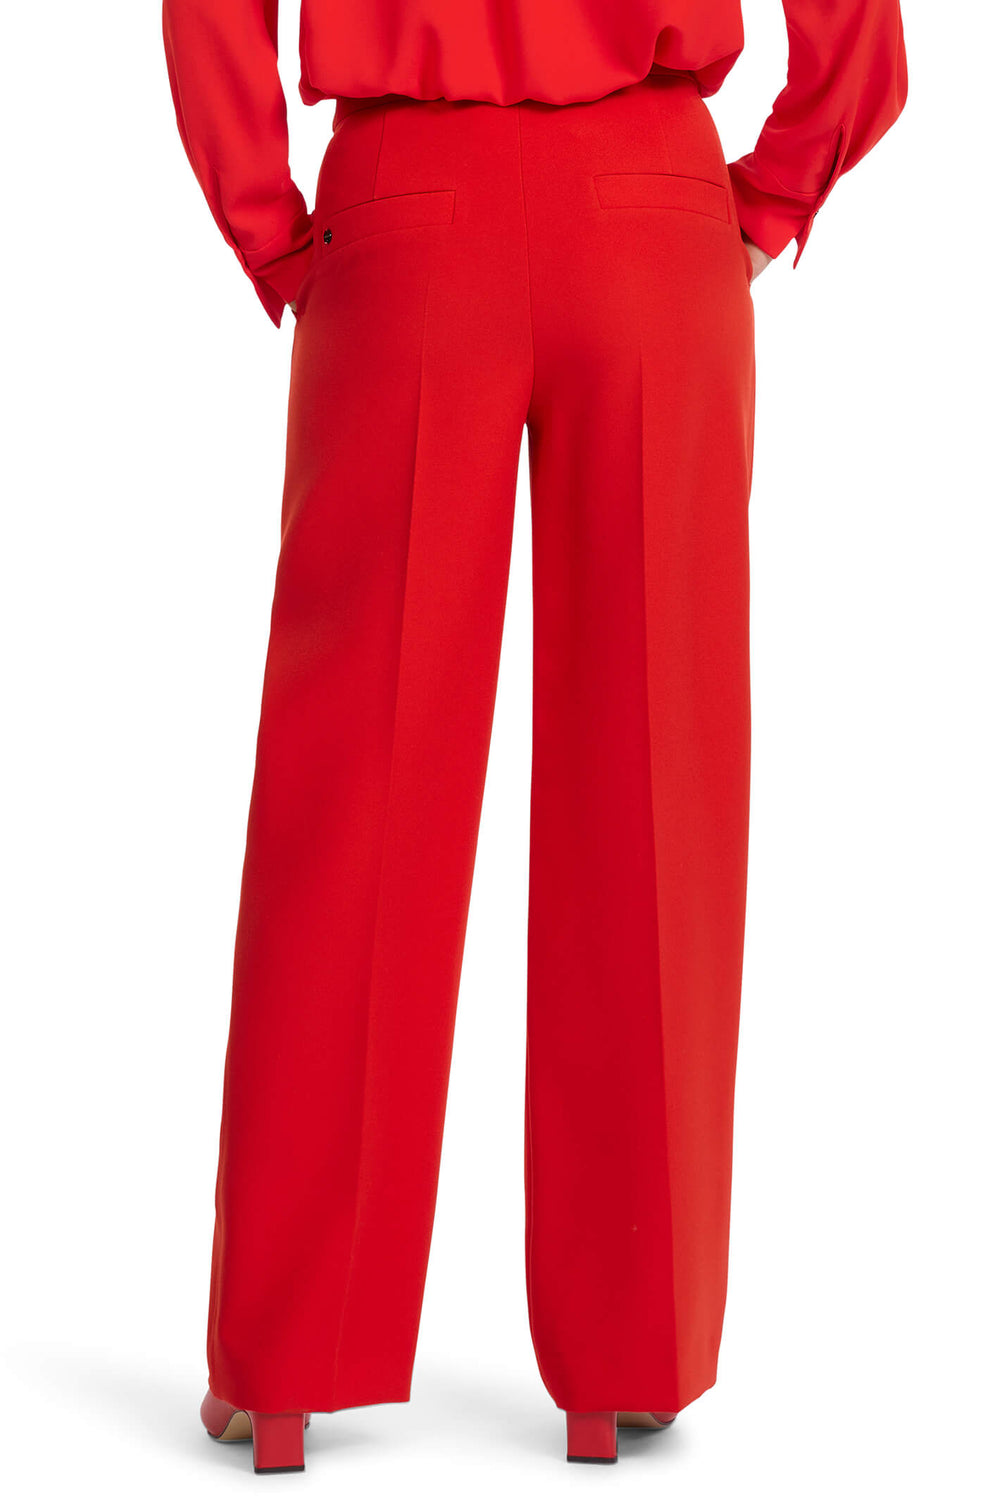 Marc Cain VC 81.52 W10 Red Wide Leg Trousers - Olivia Grace Fashion